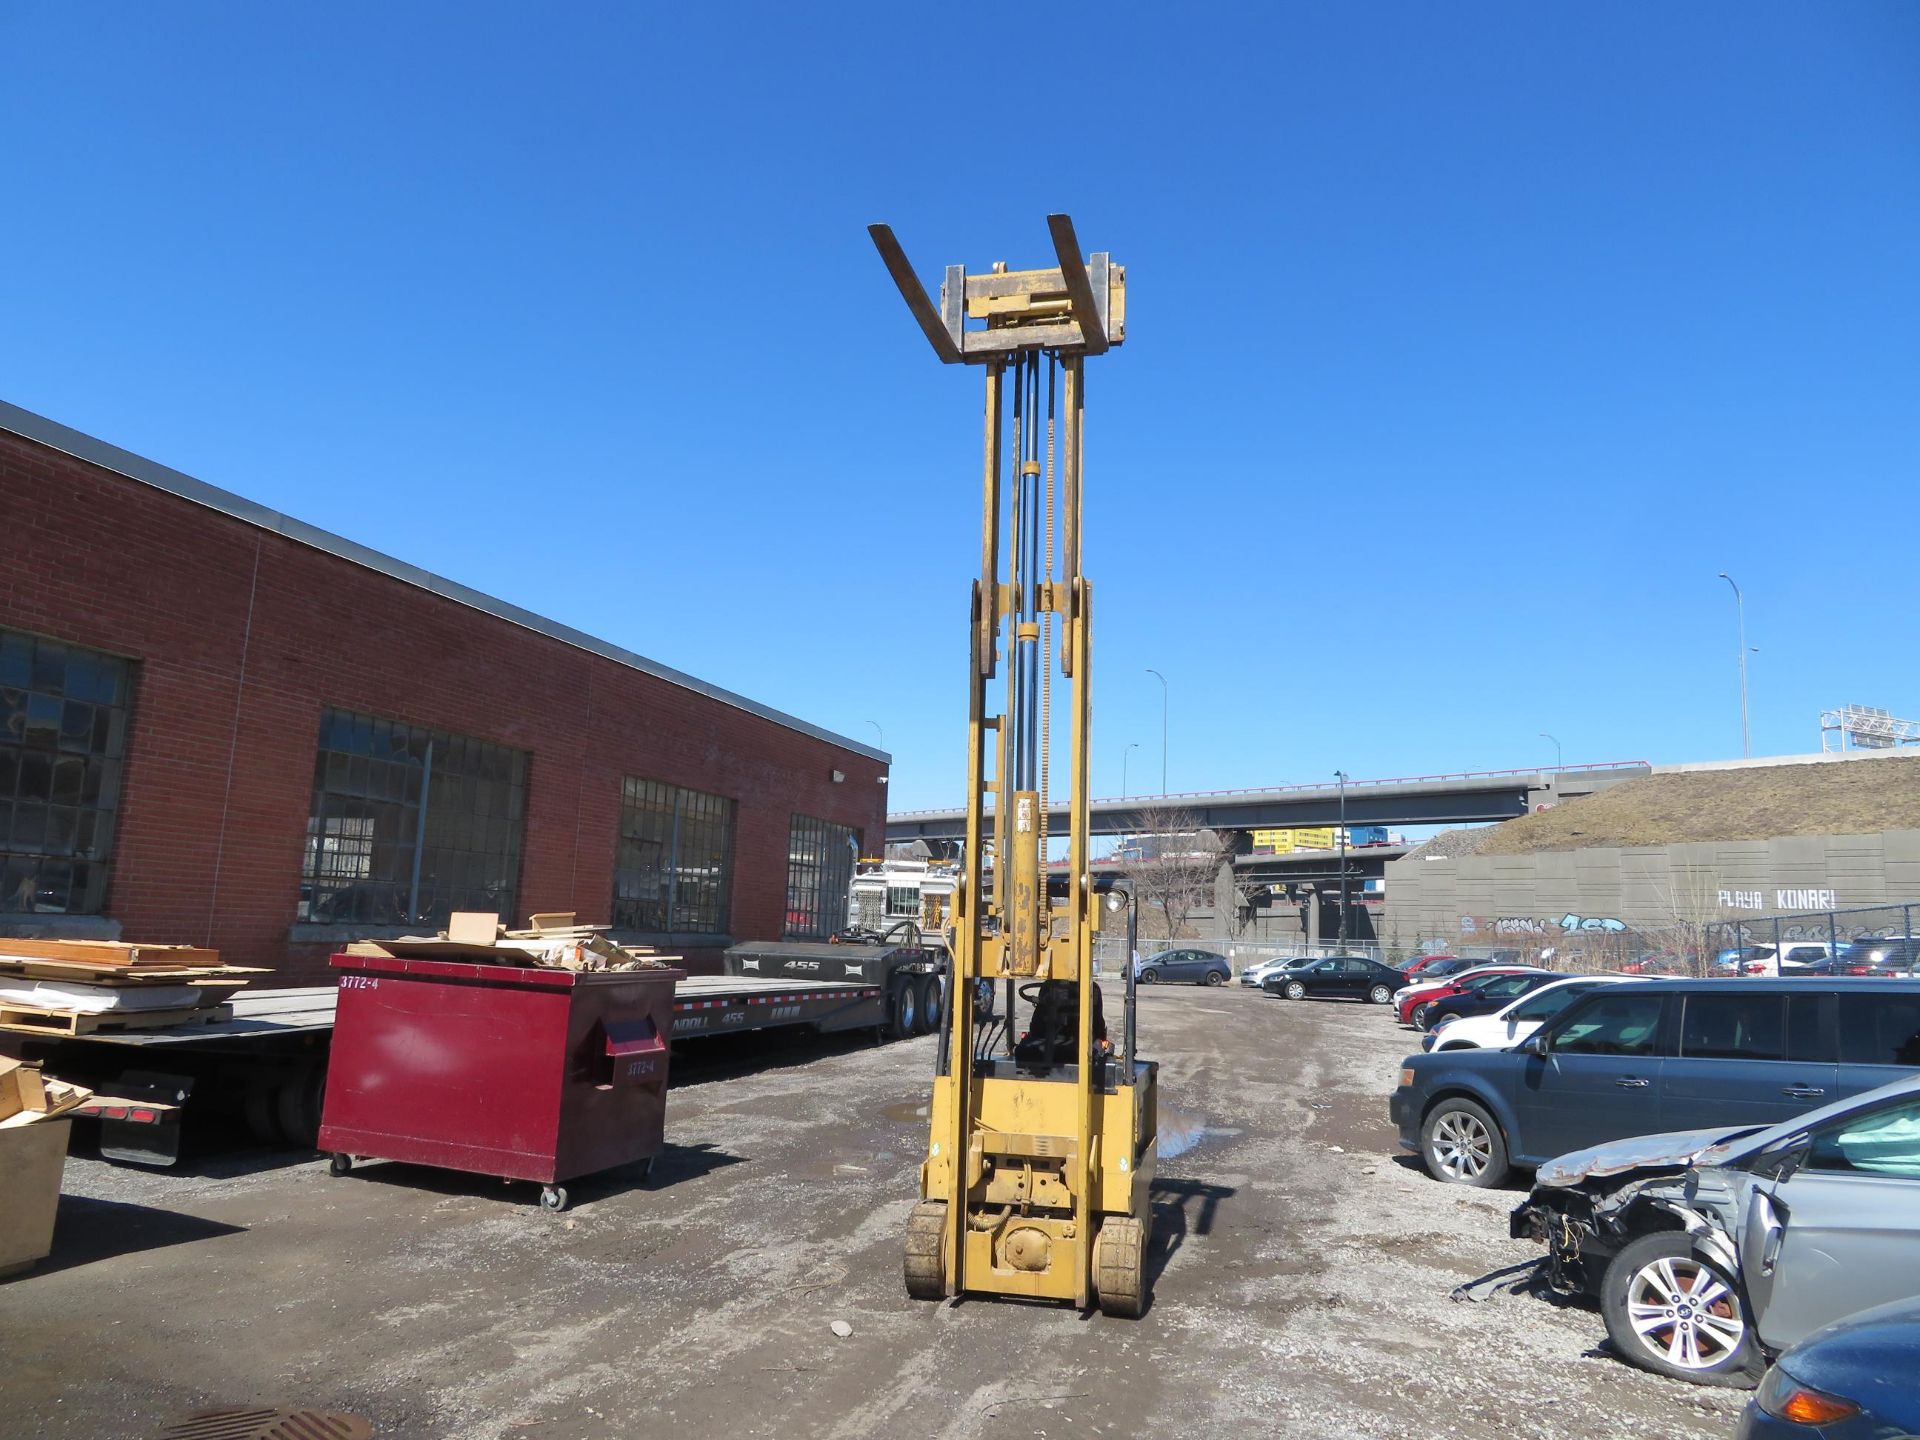 CATERPILLAR electric fork lift, Mod# M408, cap: 4,000 LBS, 3 sections, side shift, 36/48 Volts, - Image 8 of 12